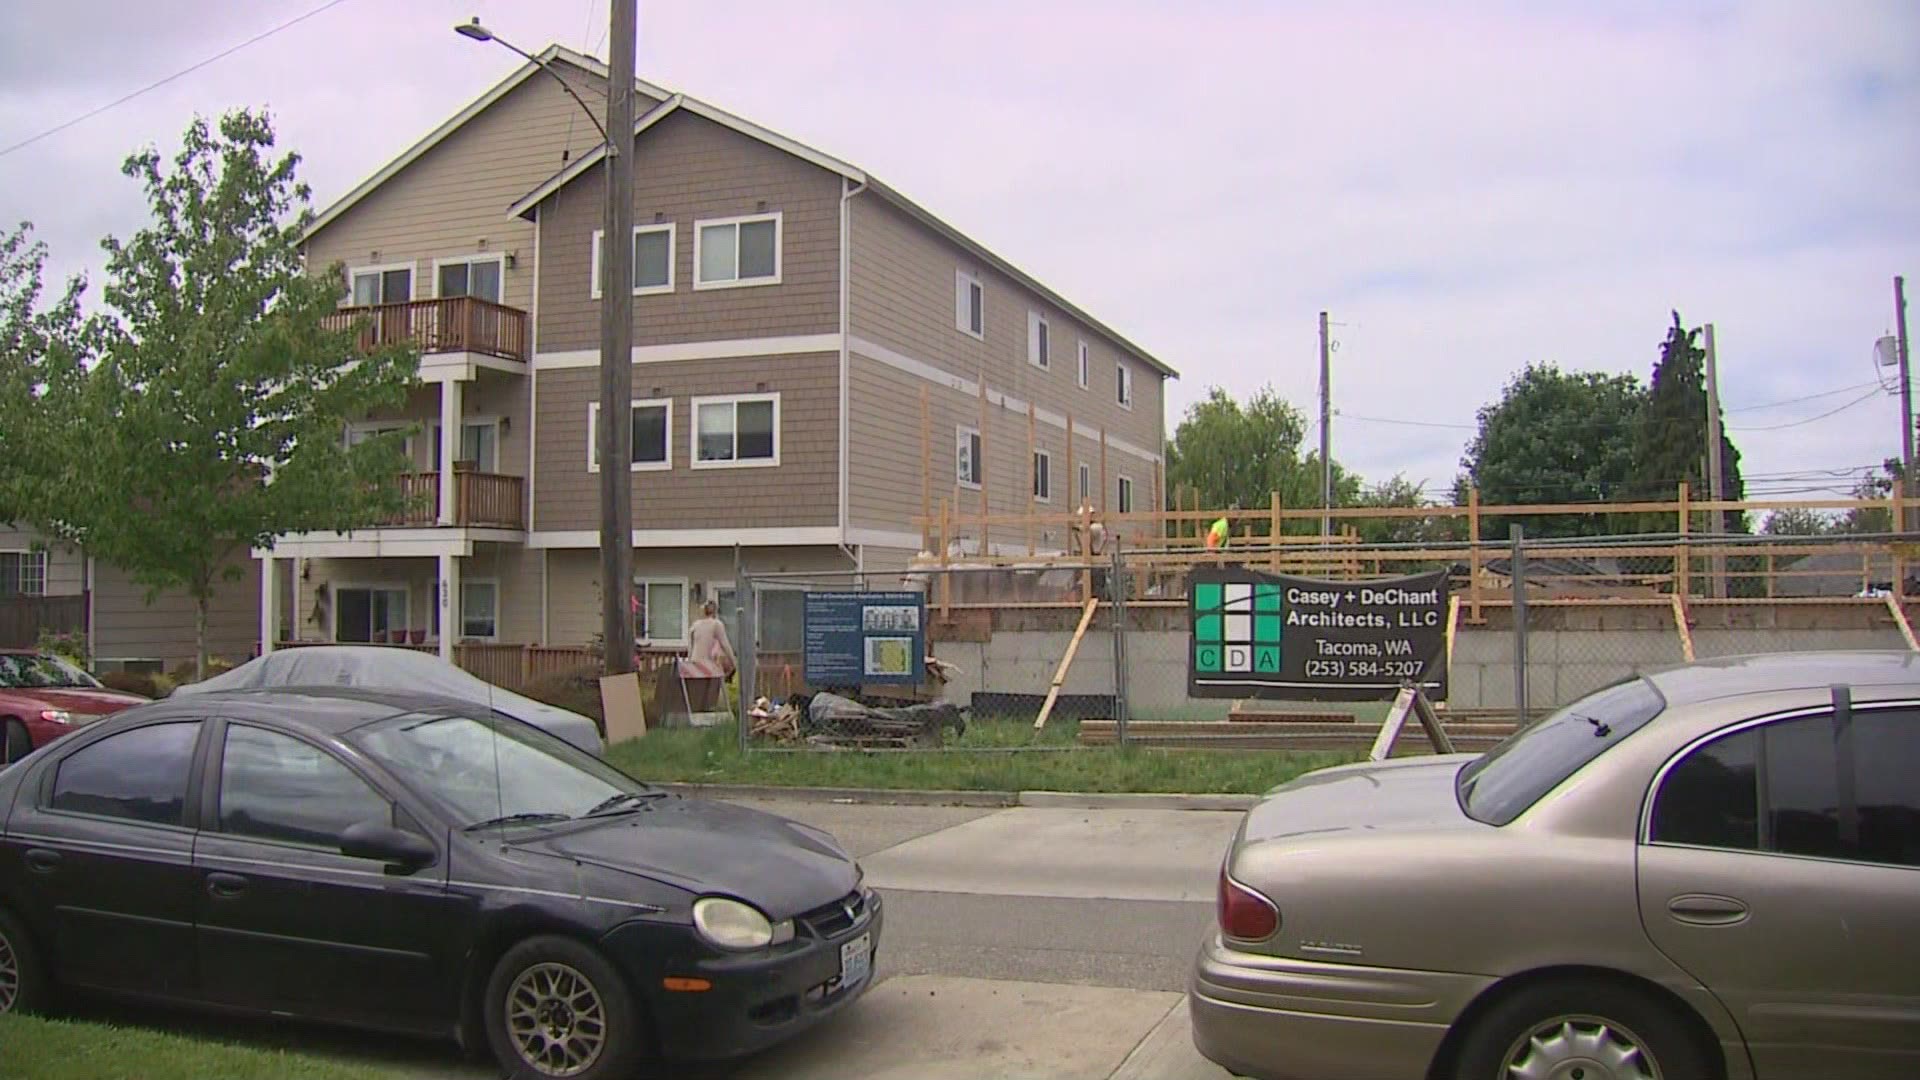 Tacoma leaders trying to create more housing in the city, but residents say they aren’t actually solving Tacoma’s housing issues, they're creating new ones.